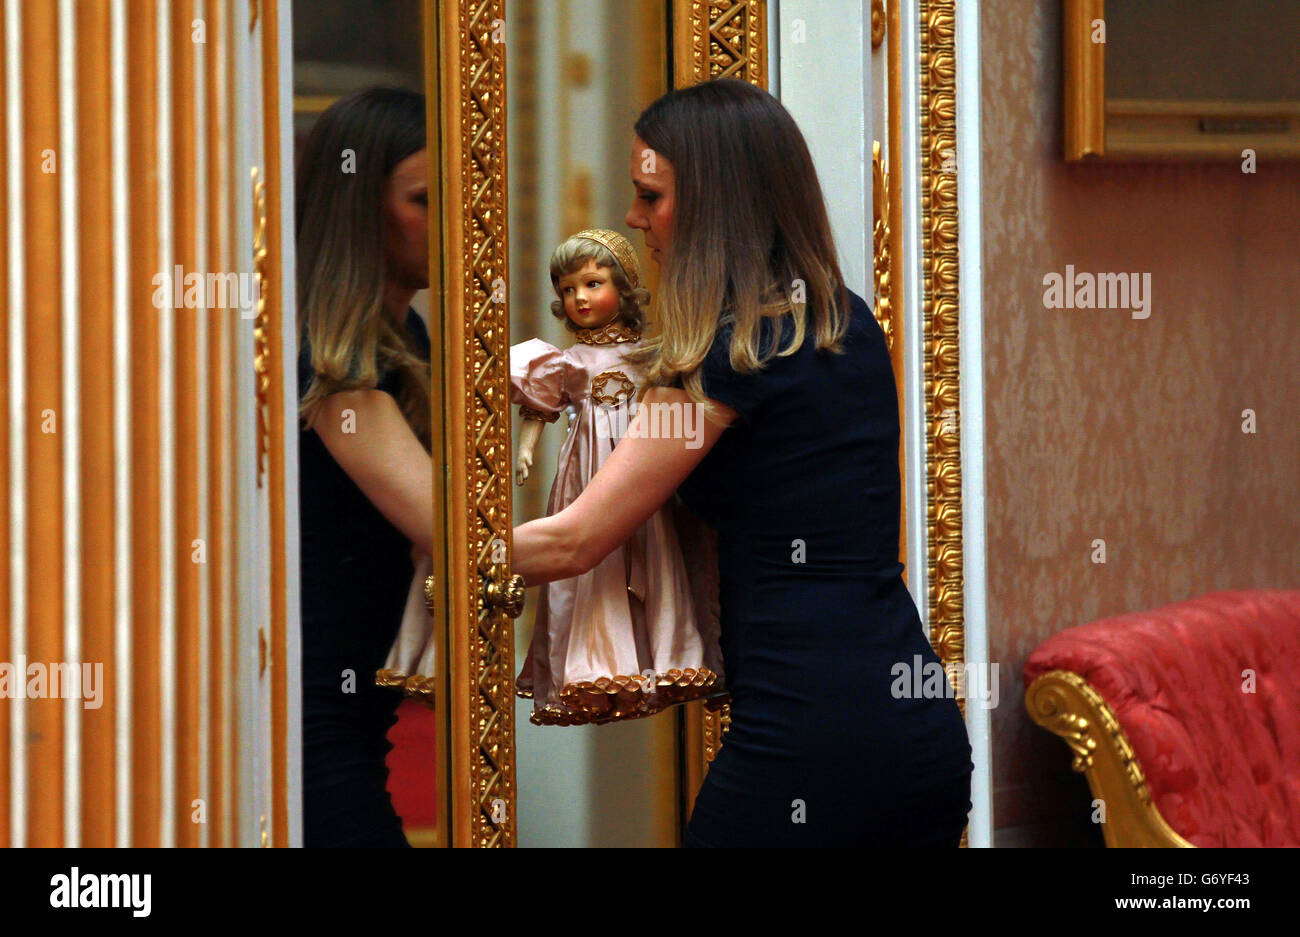 Curator Anna Reynolds with one of the Parisian dolls that belonged to Princess Margaret at the launch of the summer exhibition Royal Childhood at Buckingham Palace, London, which celebrates royal childhood with toys and family gifts belonging to the royal children when they were growing up. Stock Photo